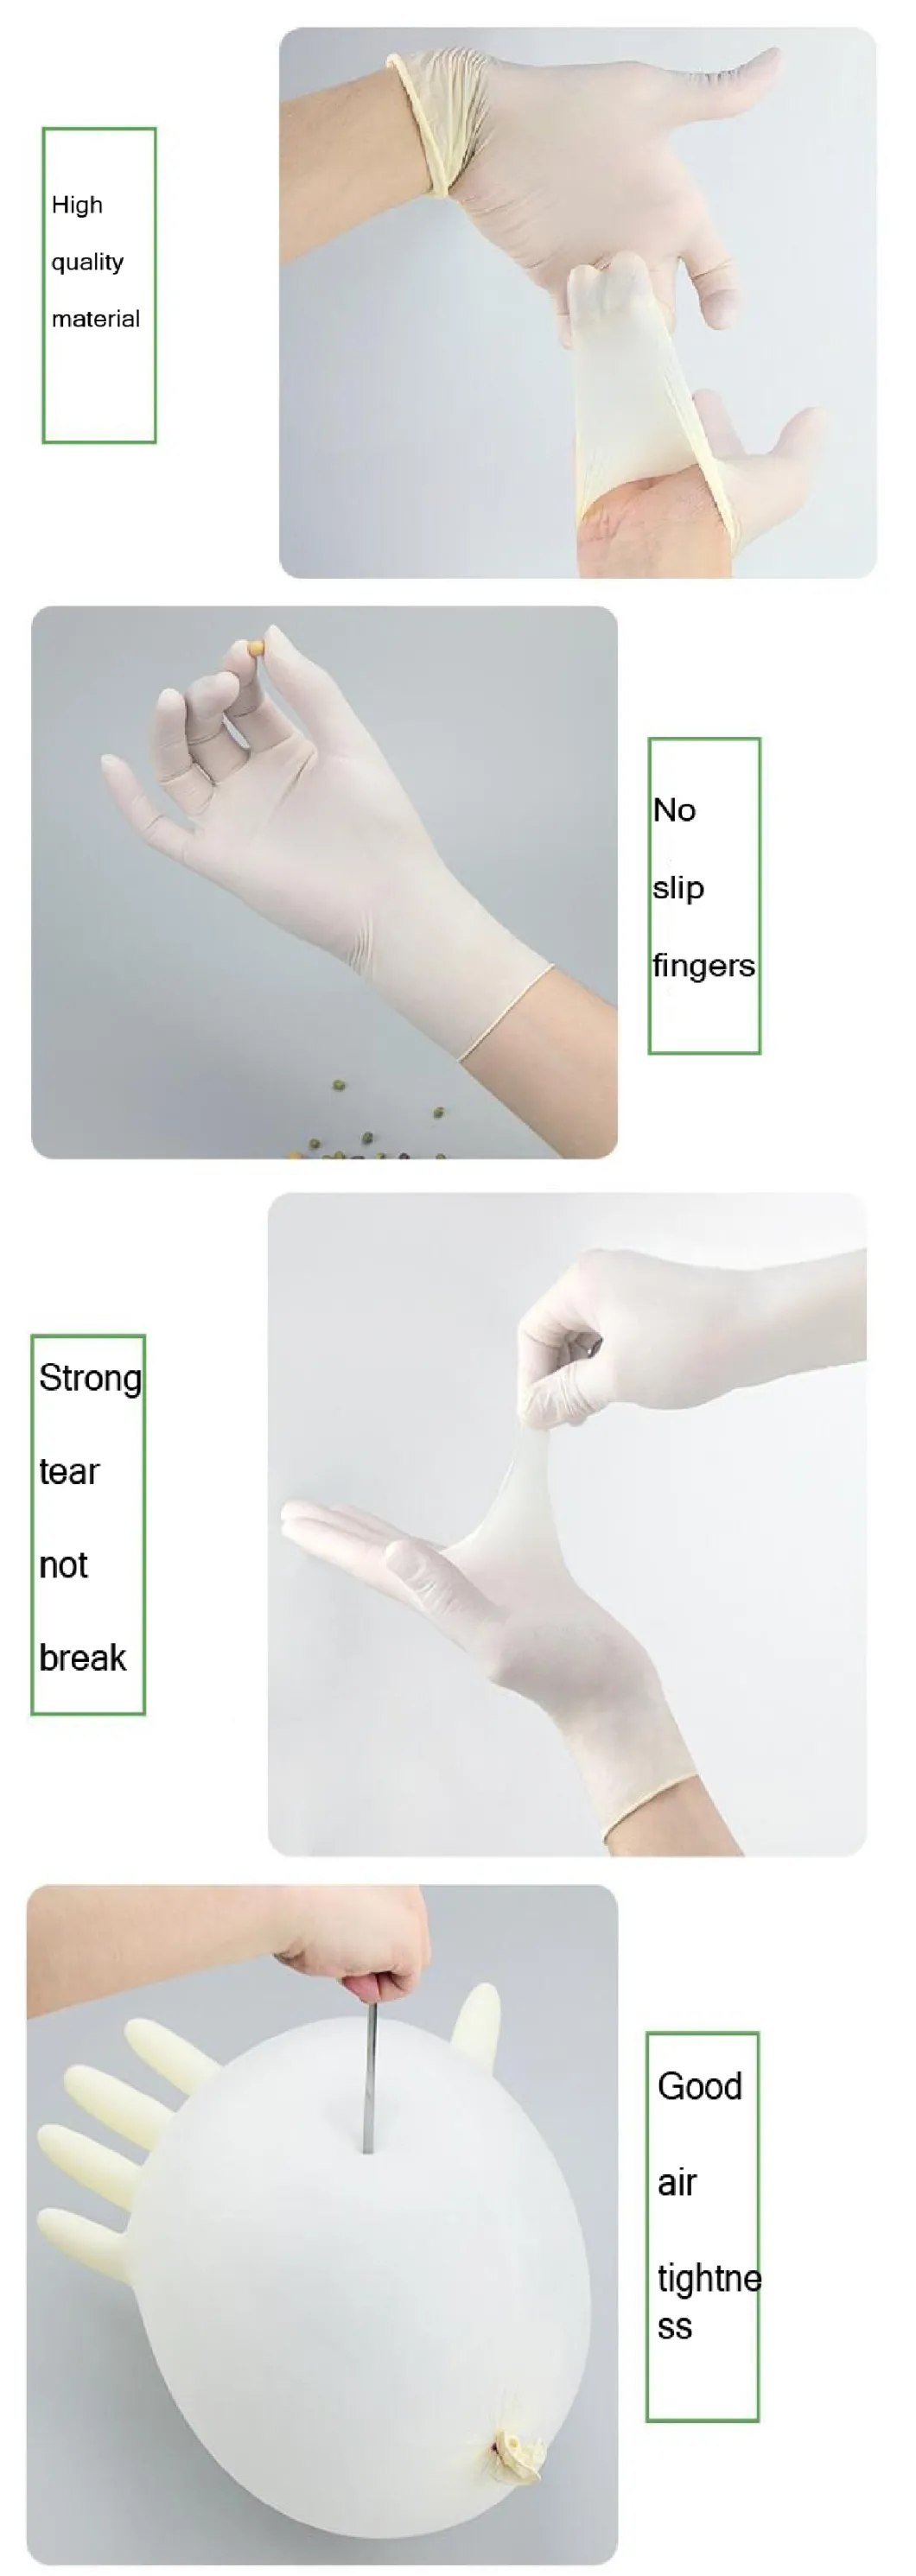 Wholesale Surgical Gloves Vinyl Gloves, Latex Gloves Disposable_Shoe_Cover, Disposable Shoe Cover Certificate and Available